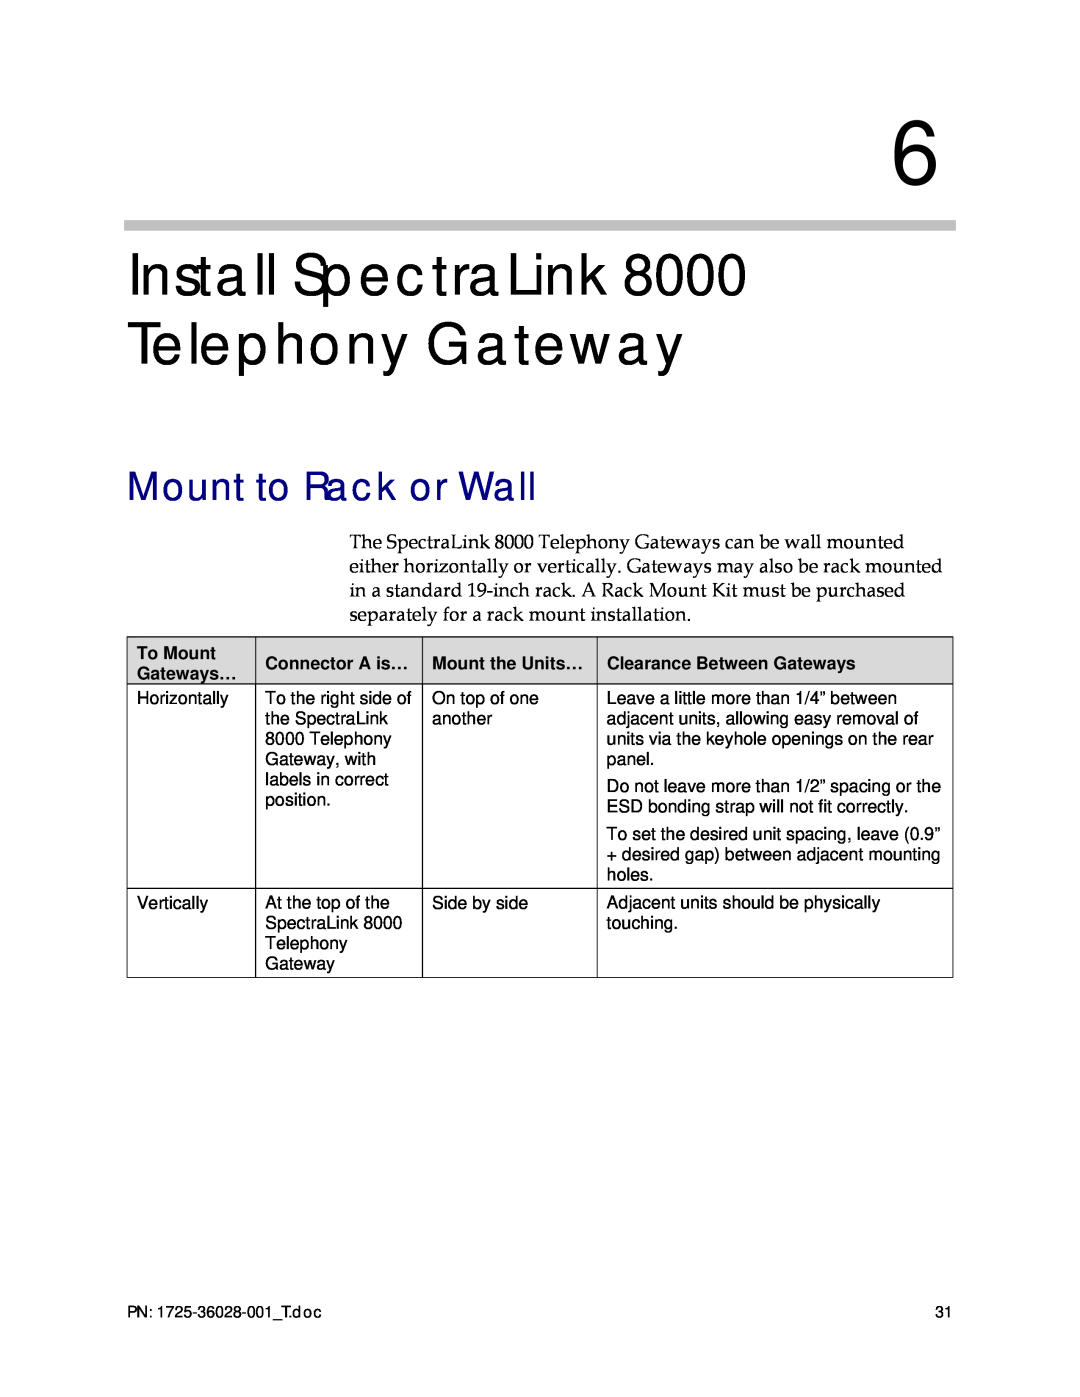 Polycom 1725-36028-001 manual Install SpectraLink 8000 Telephony Gateway, Mount to Rack or Wall, To Mount, Connector A is… 